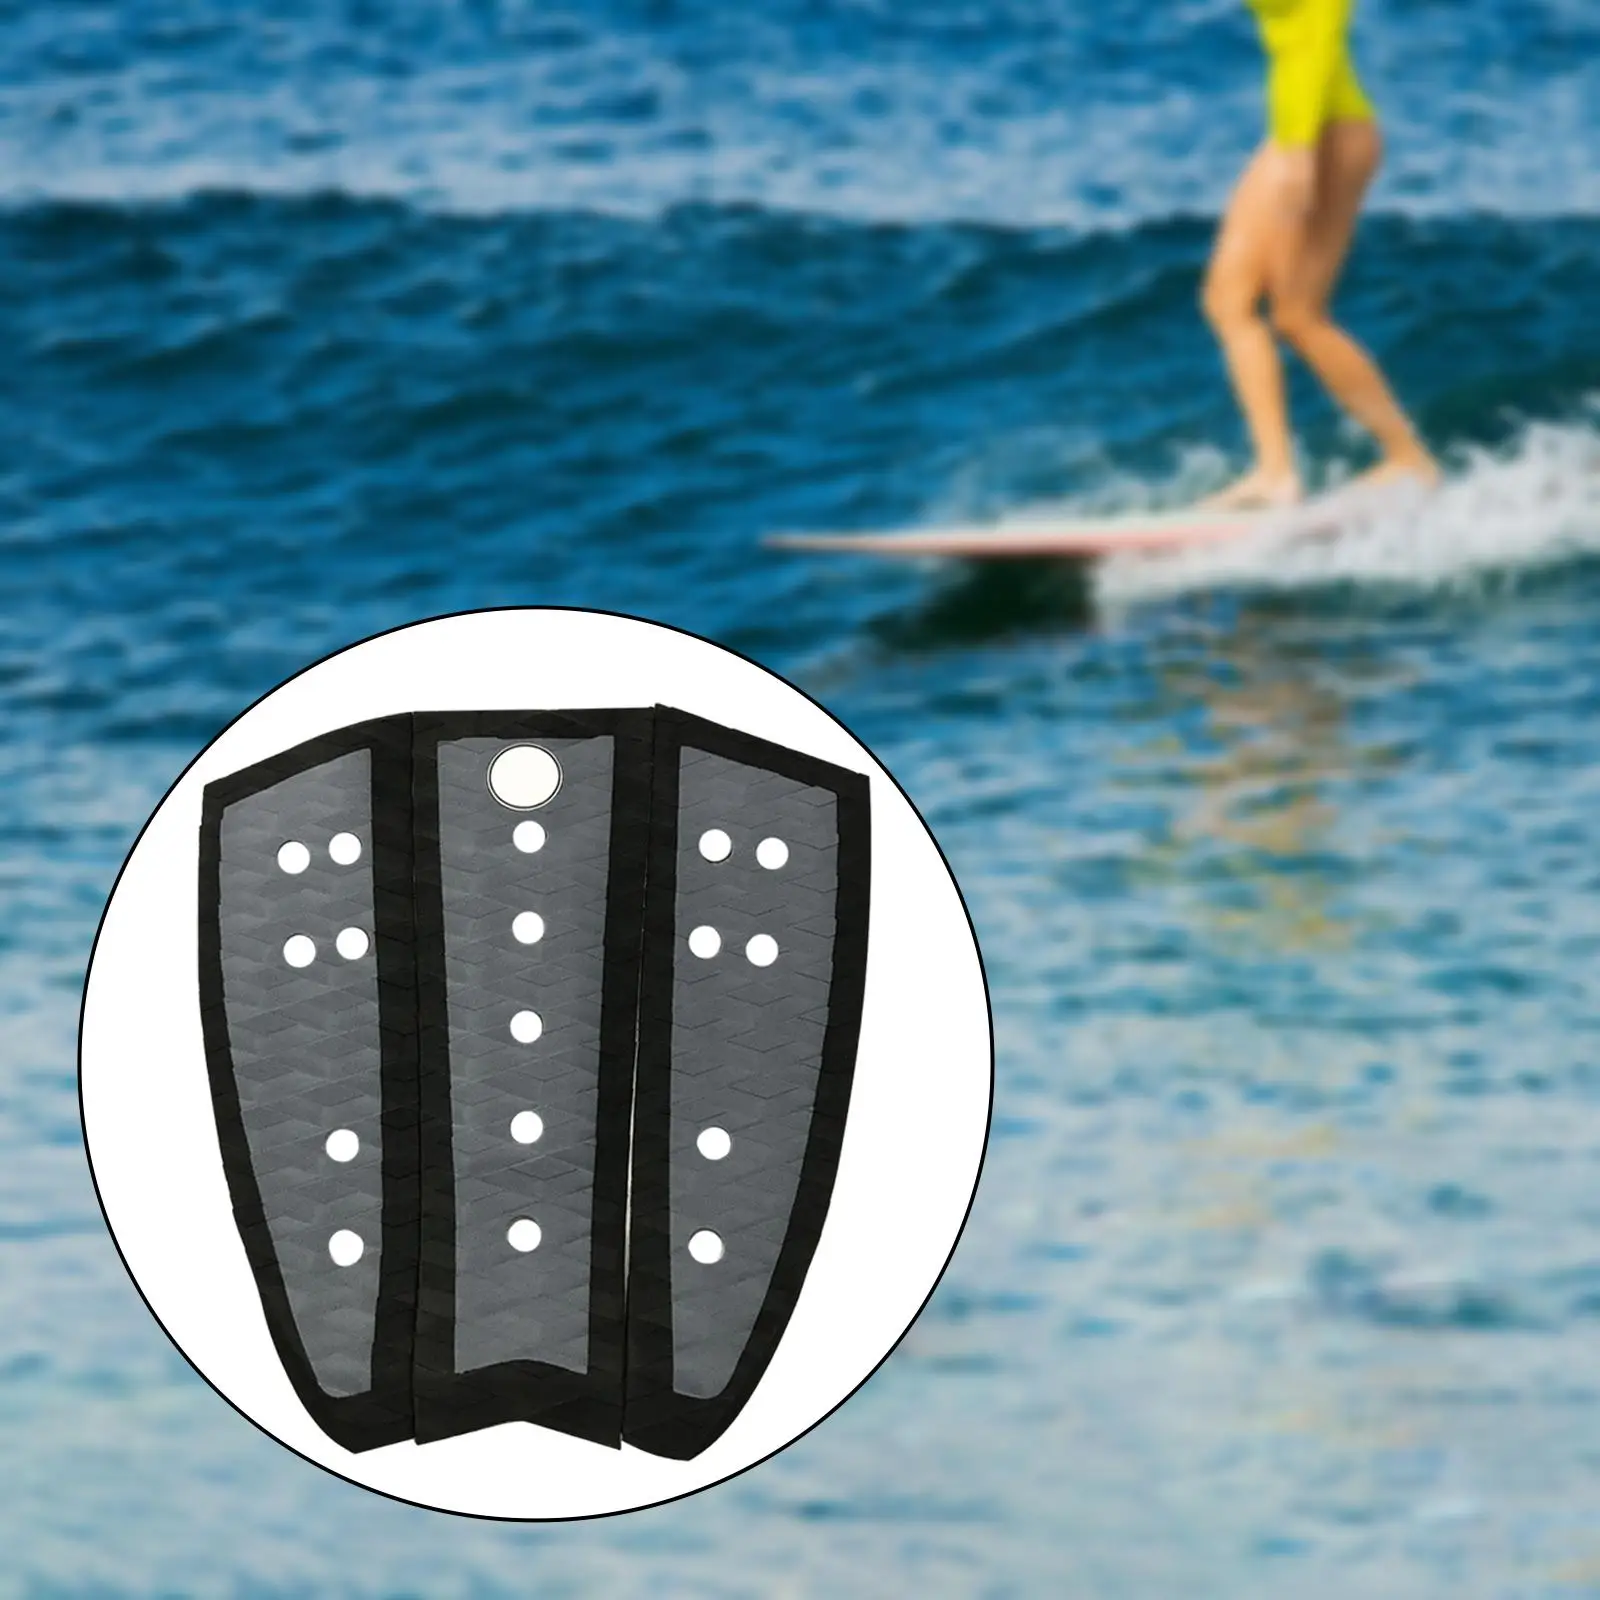 3Pcs Lightweight Surfboard Traction Pad Surfing Padding Deck Pad Grip Tail Pad Non Slip for Shortboards Fish Board Accessories